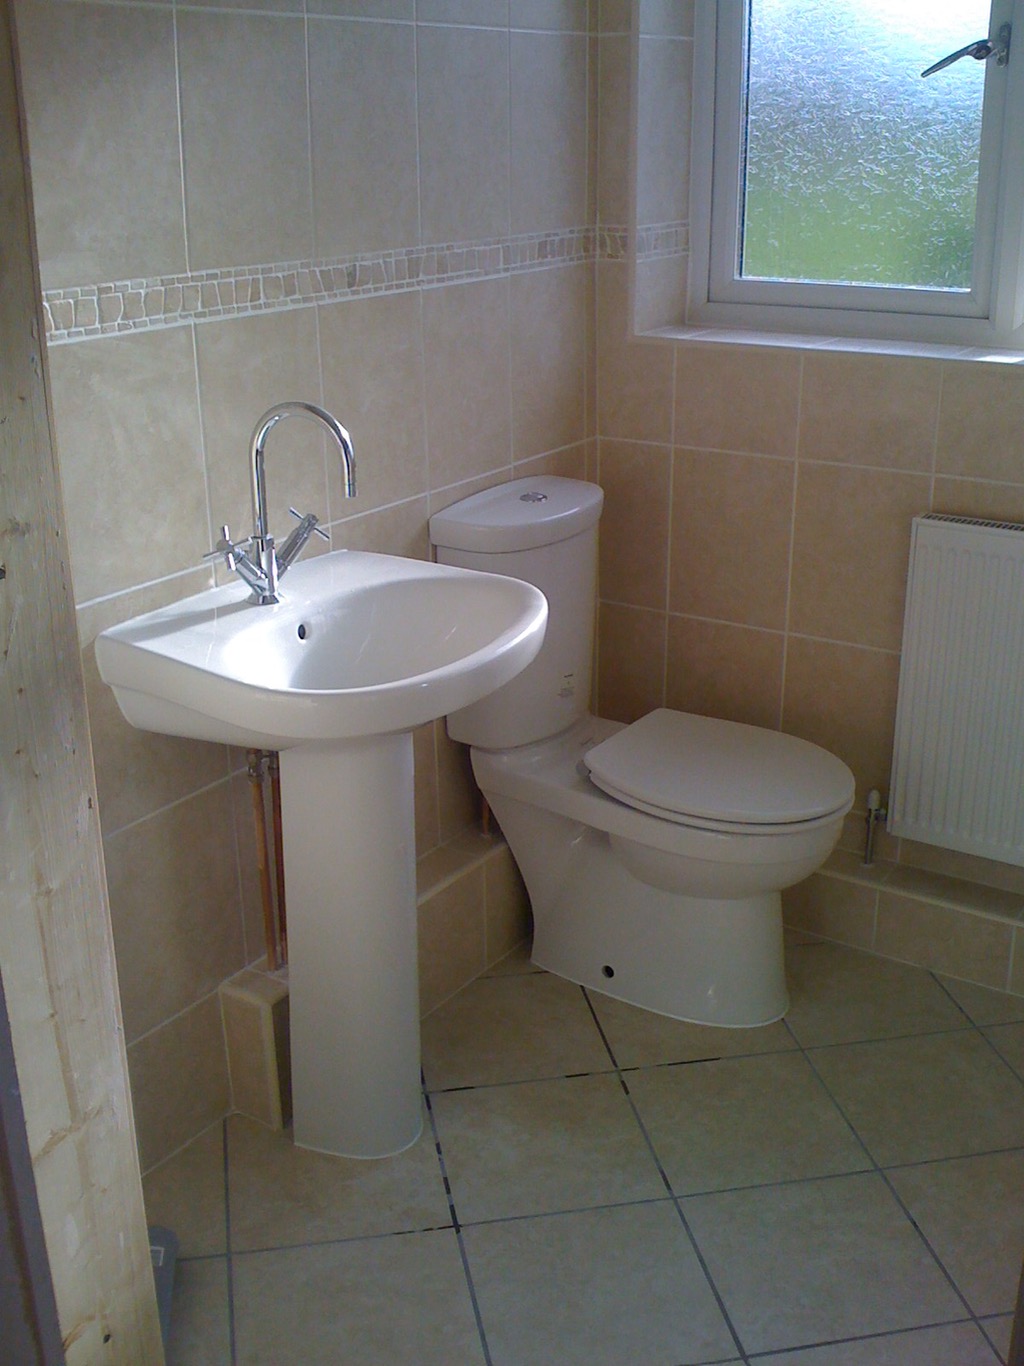 Basin and Toilet